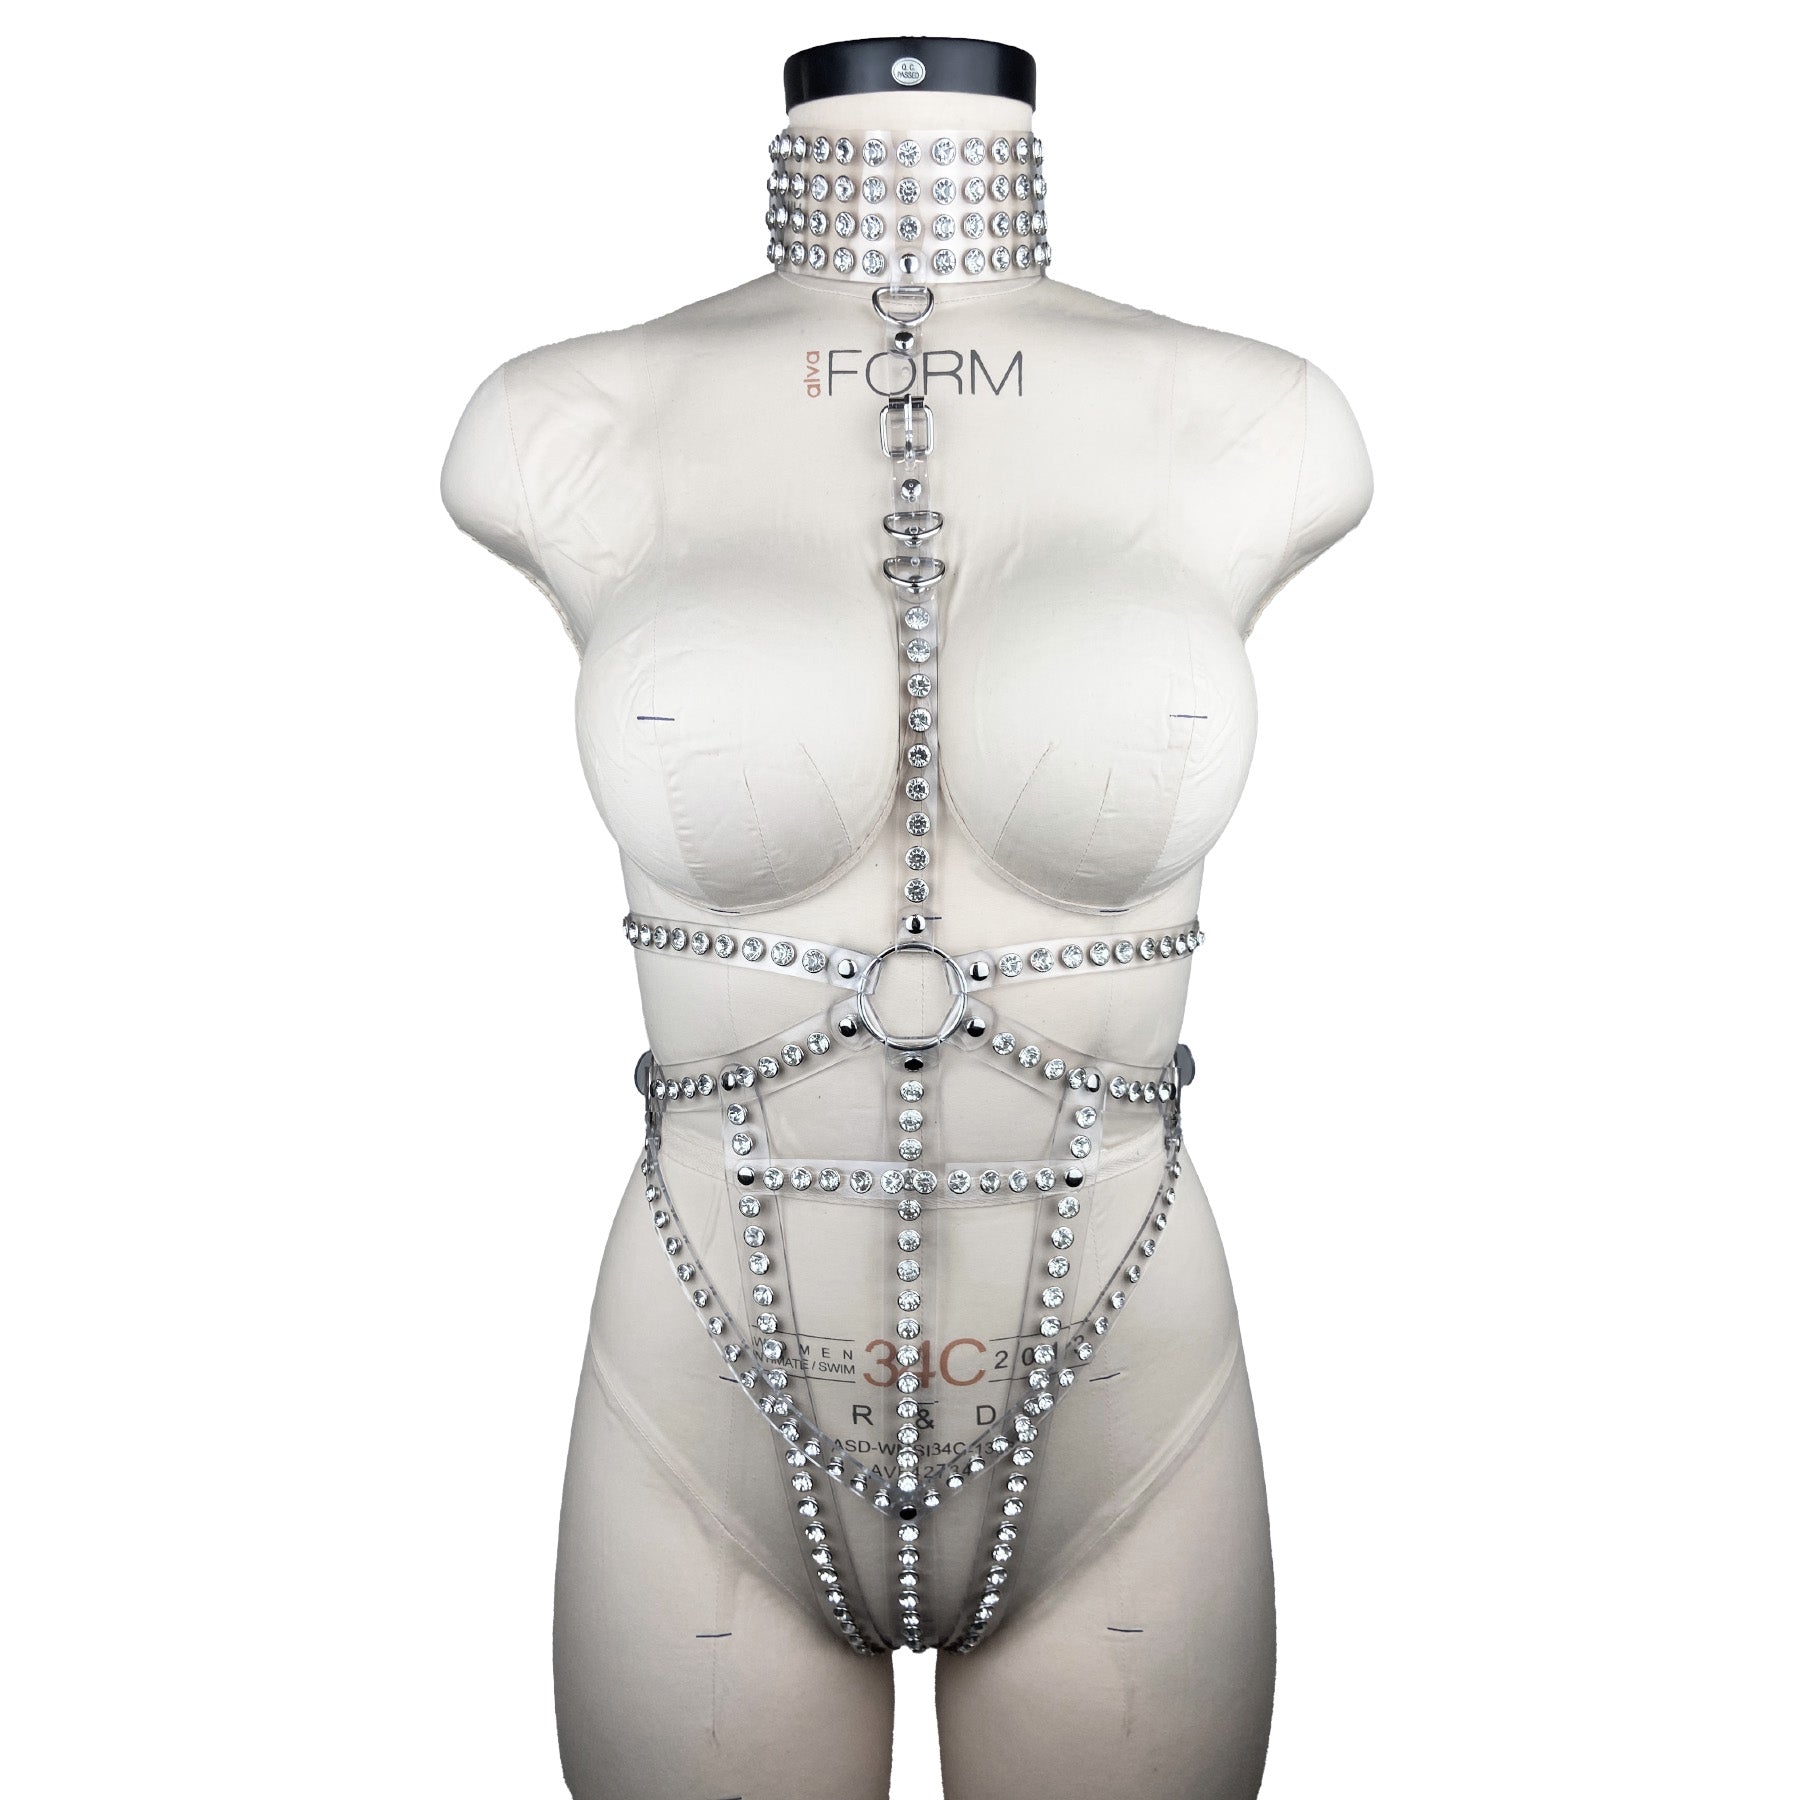 vinyl pvc and crystal fashion and fetish body harness, bespoke, made-to-order in nyc, front view